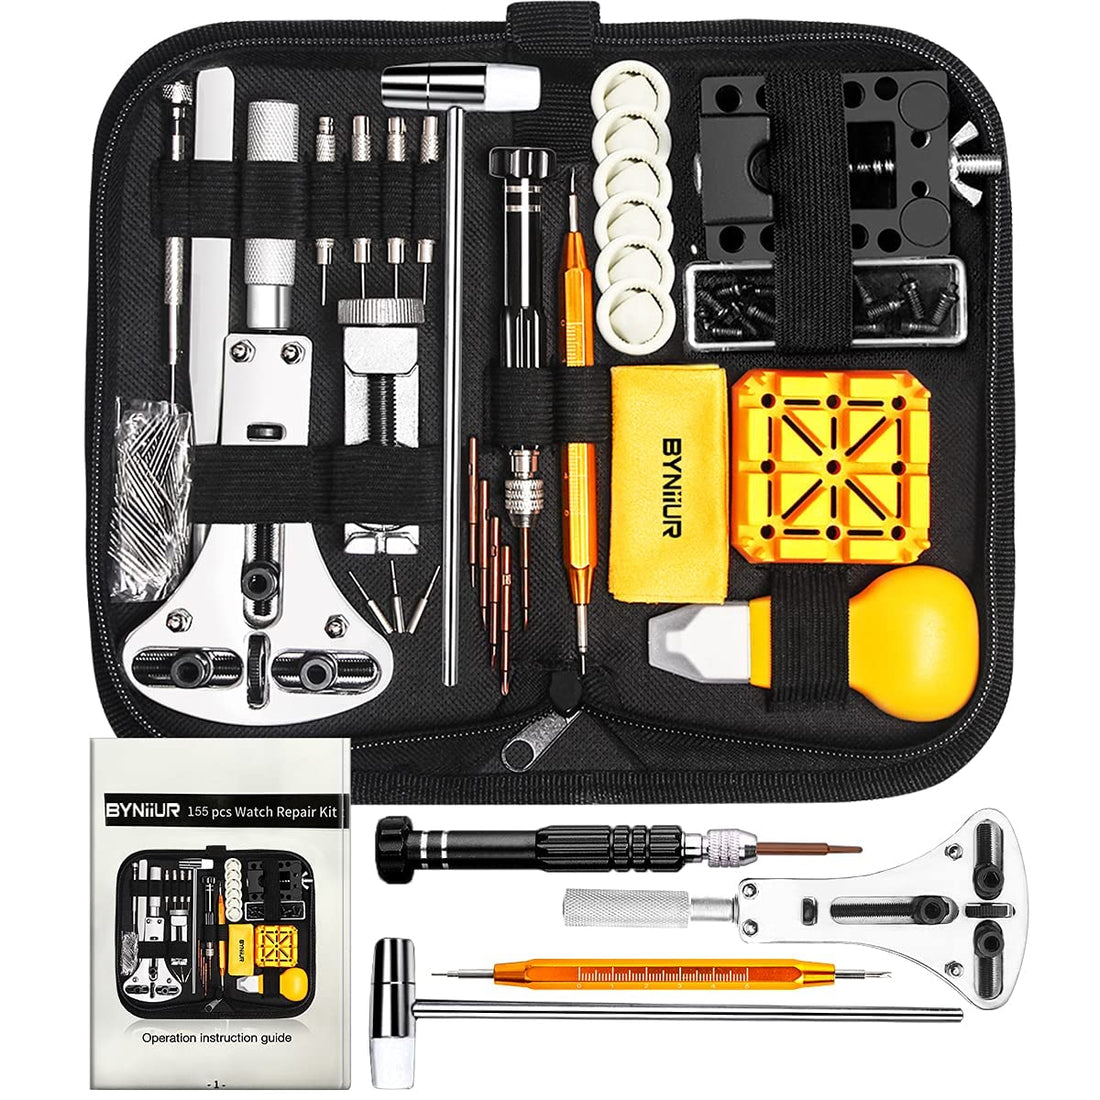 AULITER Watch Repair Kit,Watch Case Opener Spring Bar Tools,Watch Battery Replacement Tool Kit,Watch Band Link Pin Tool Set with Carrying Case